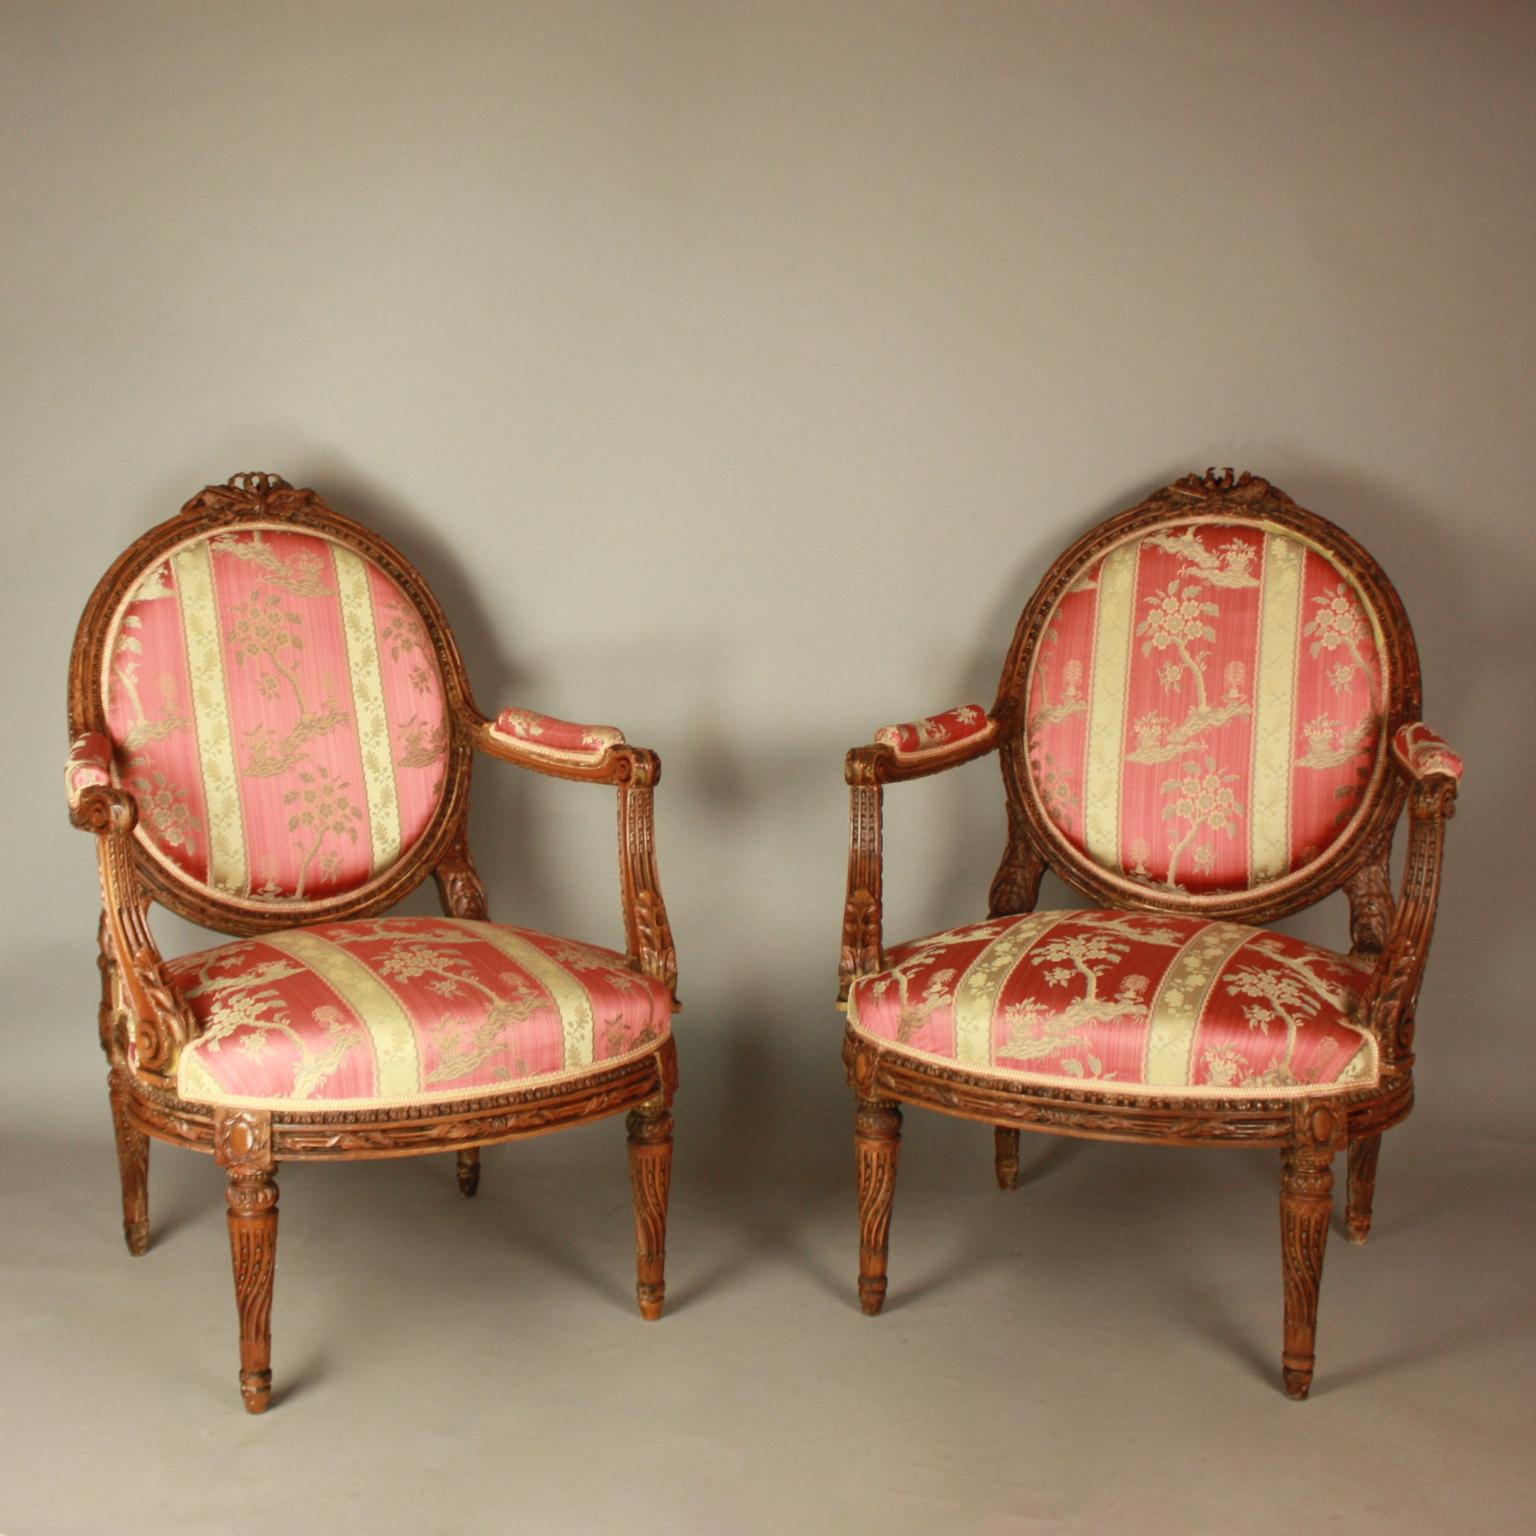 Pair of Large French 19th Century Louis XVI Style Walnut Fauteuils or Armchairs after a model by Jean-René Nadal (1733-1783, Maîtrise 1756): 

A pair of Louis XVI style walnut fauteuils of generous proportions. Each with a medallion back, padded